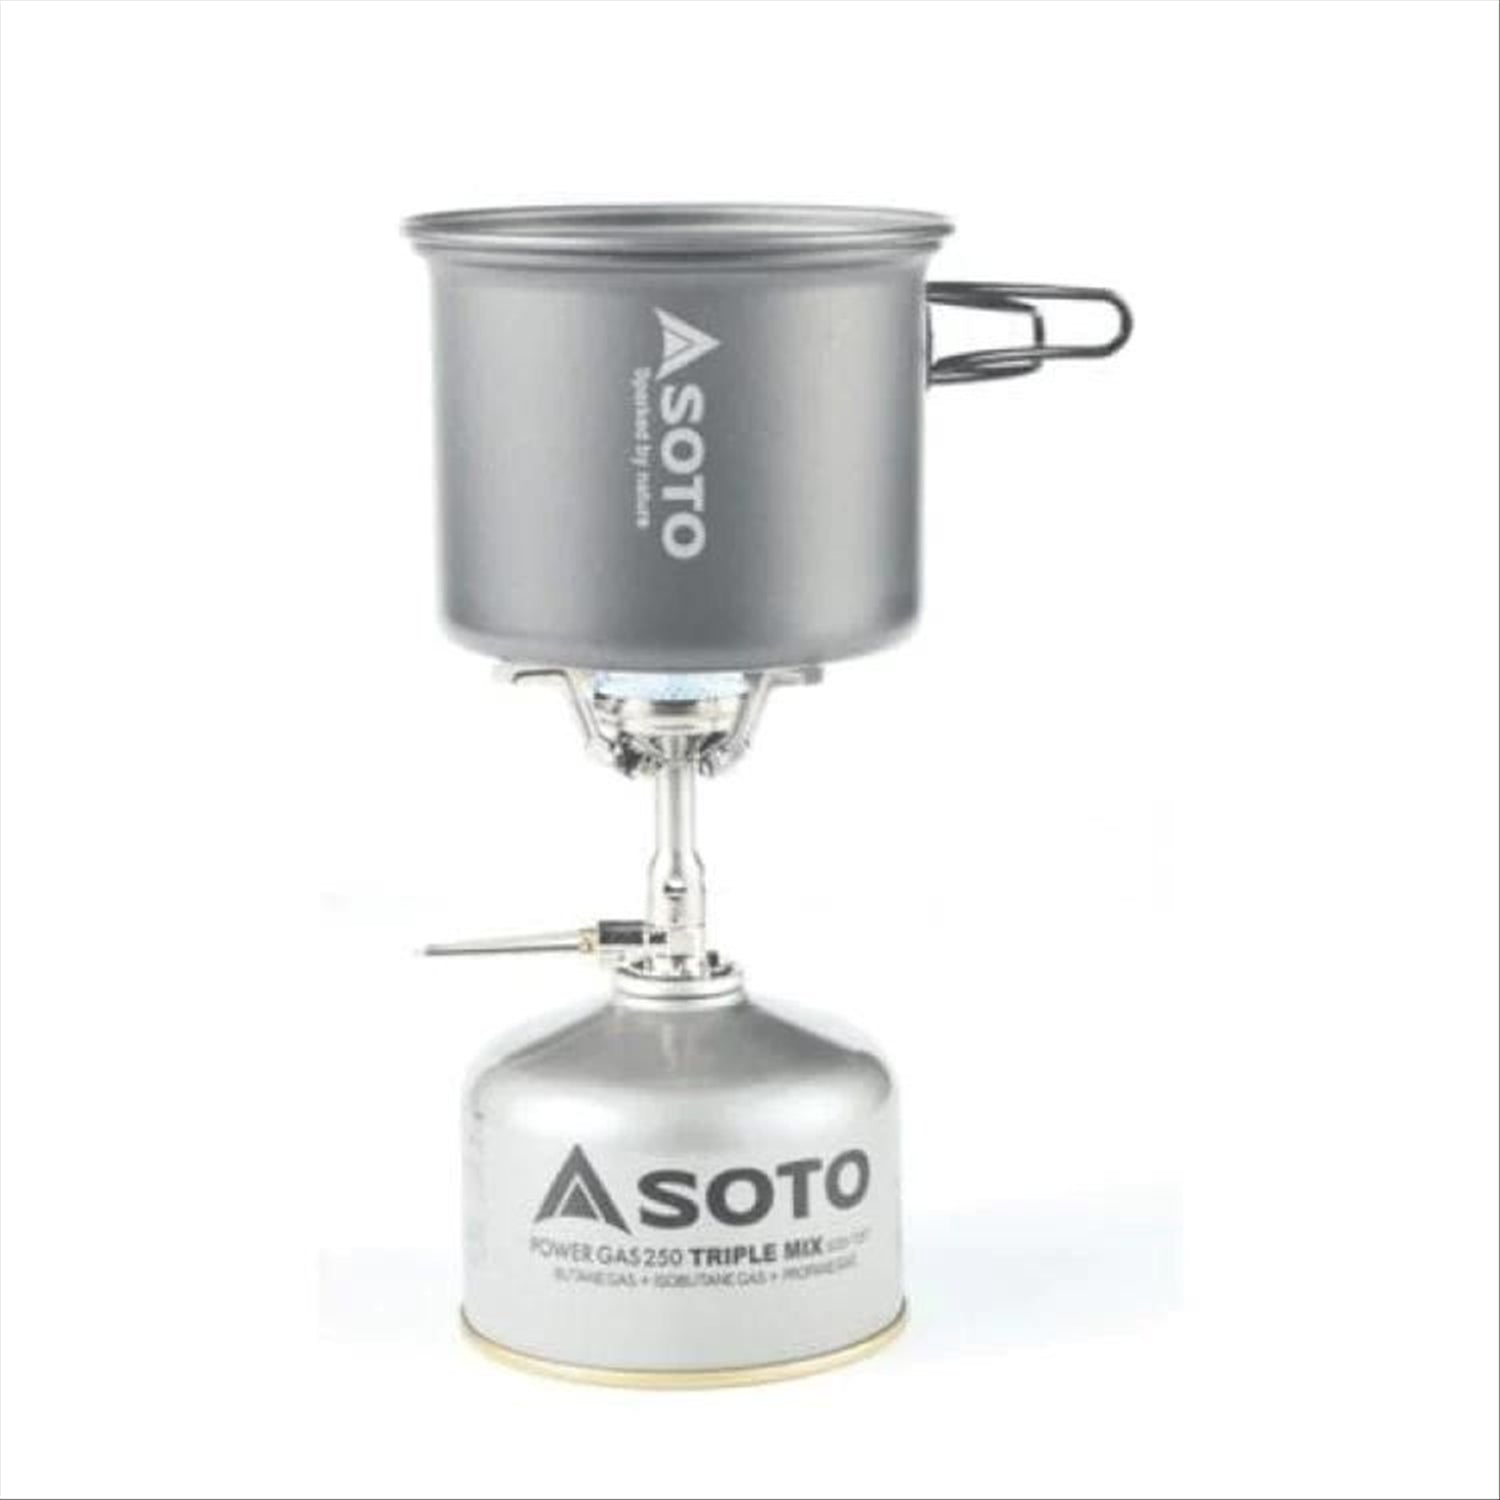 Soto Soto Amicus Stove and Cookset Combo